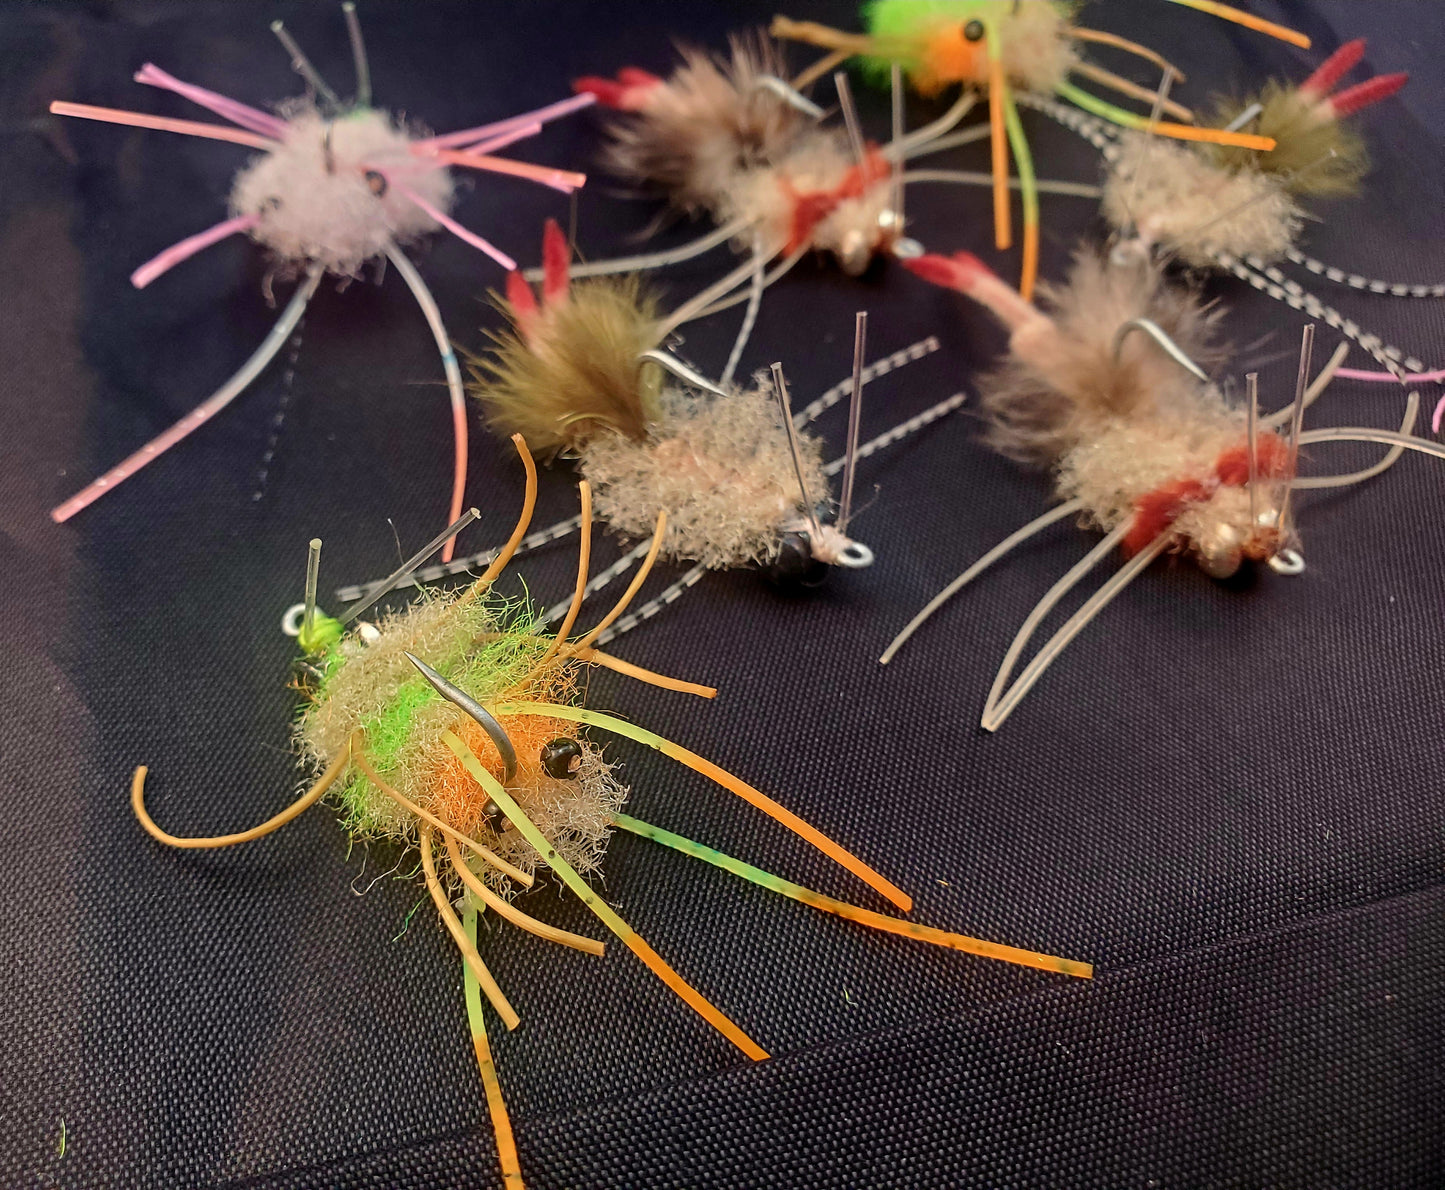 Permit Fly Selection, Bonefish Fly Selection, Sand Crab Fly, Permit Crab Fly